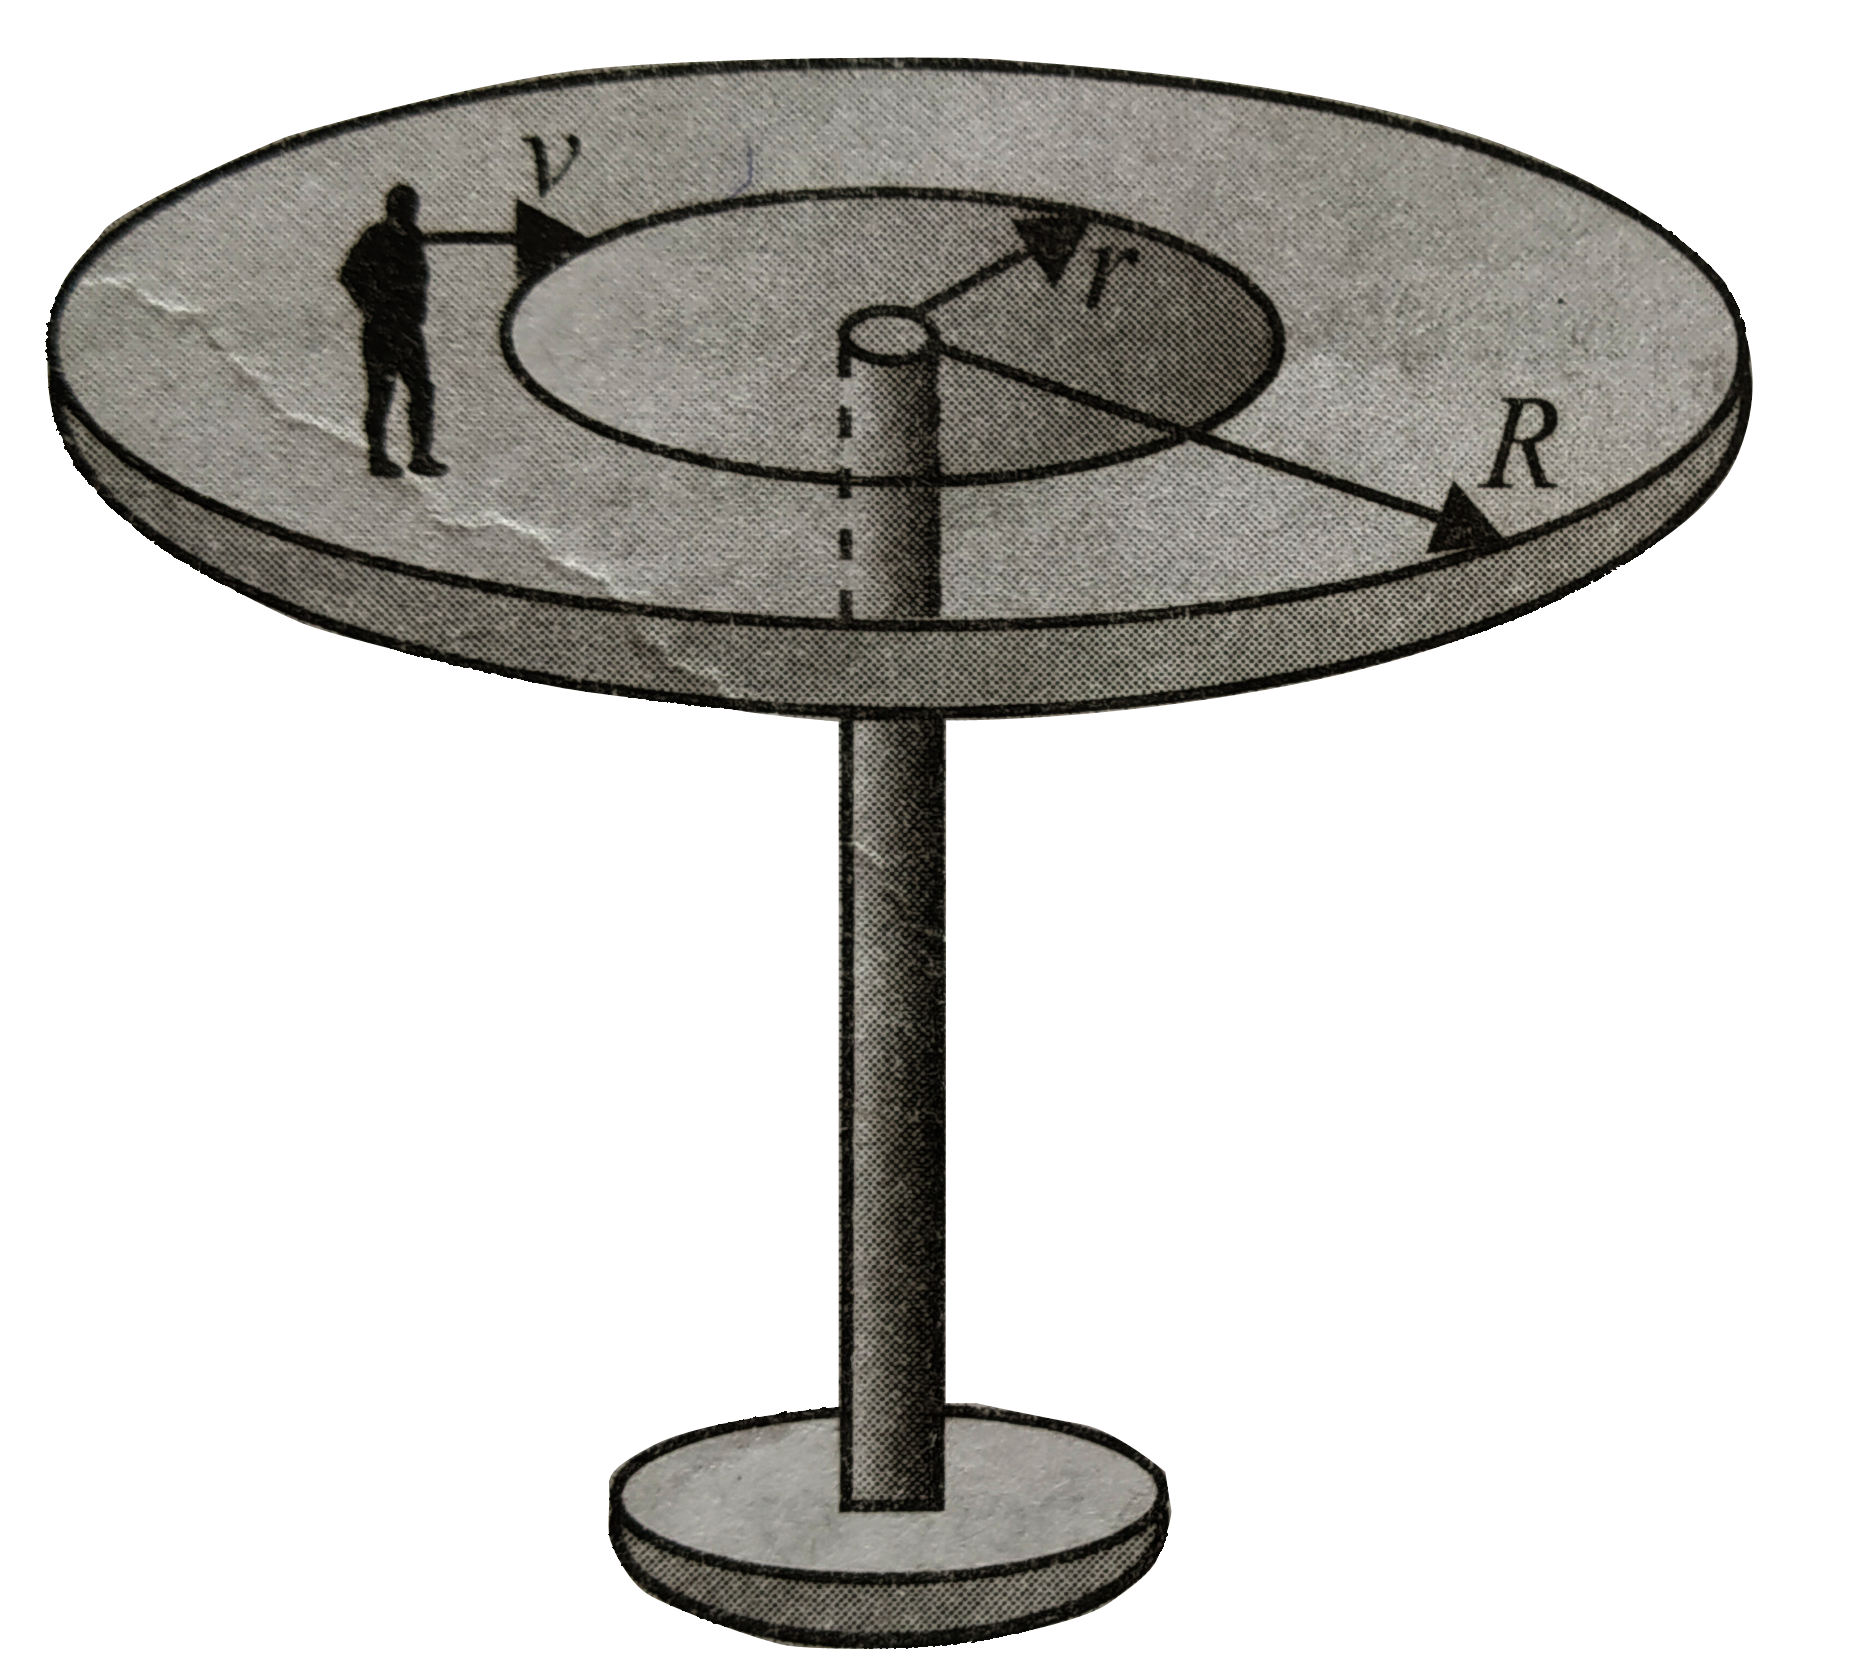 A man of mass m stands on a horizontal platform in the shape of a disc of mass m and radius R, pivoted on a vertical axis thorugh its centre about which it can freely rotate. The man starts to move aroung the centre of the disc in a circle of radius r with a velocity v relative to the disc. Calculate the angular velocity of the disc.